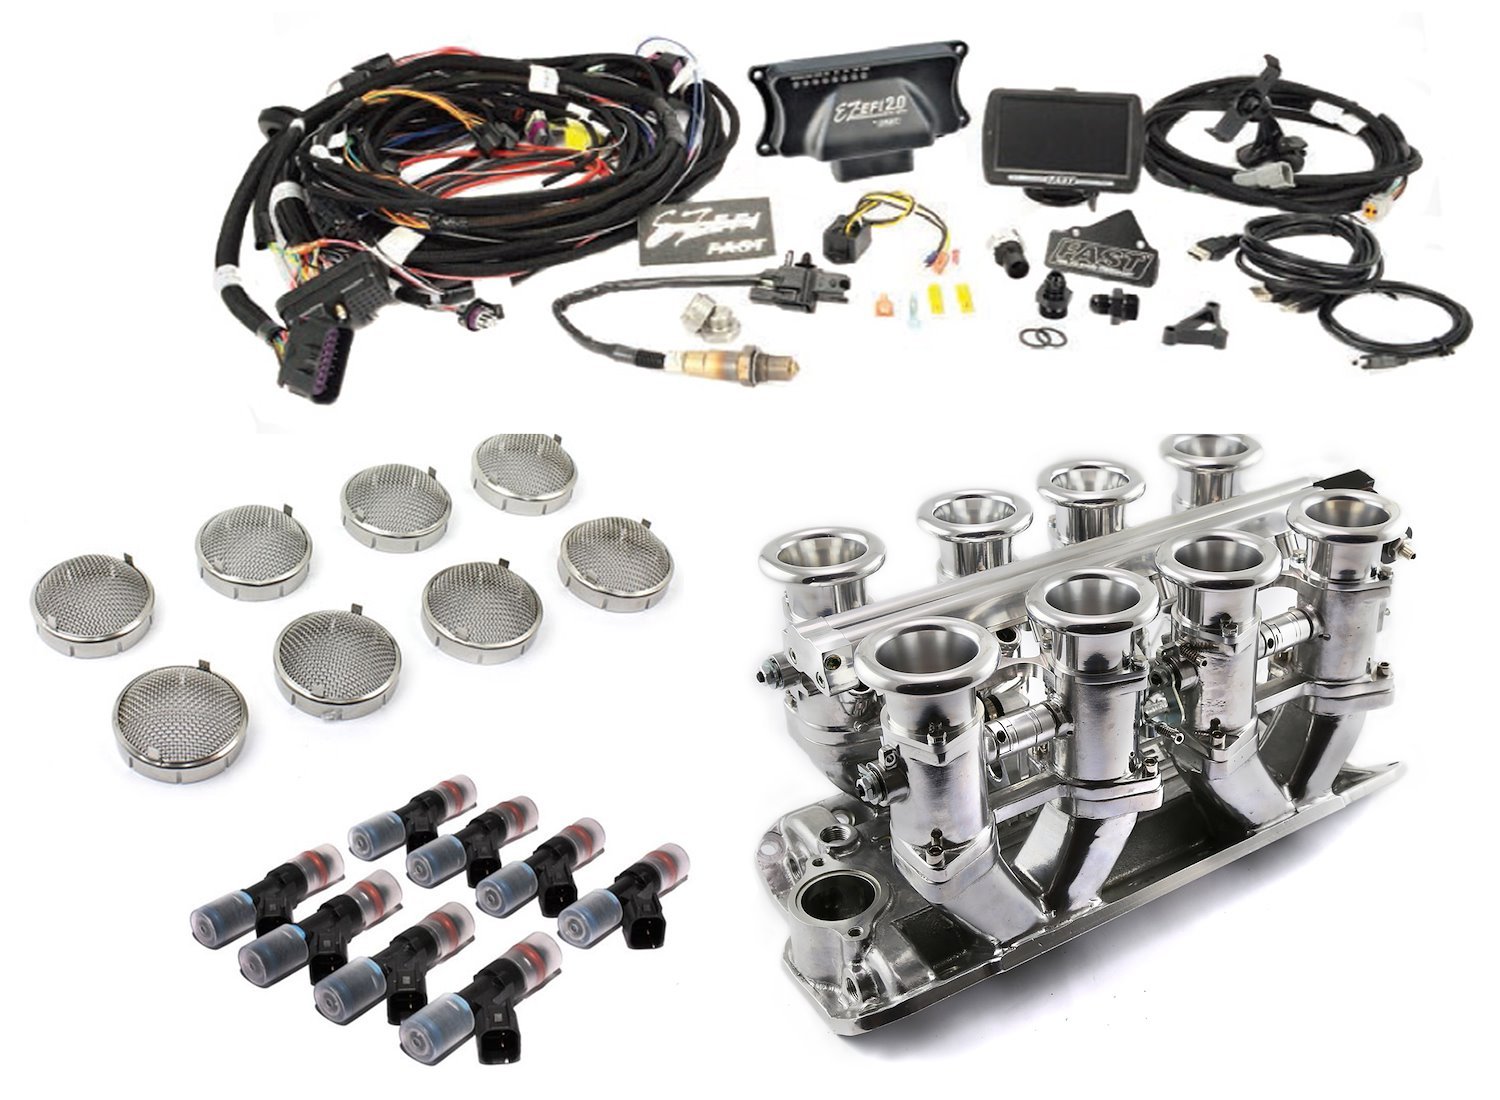 Downdraft EFI Stack Intake System Kit for Small Block Chevy